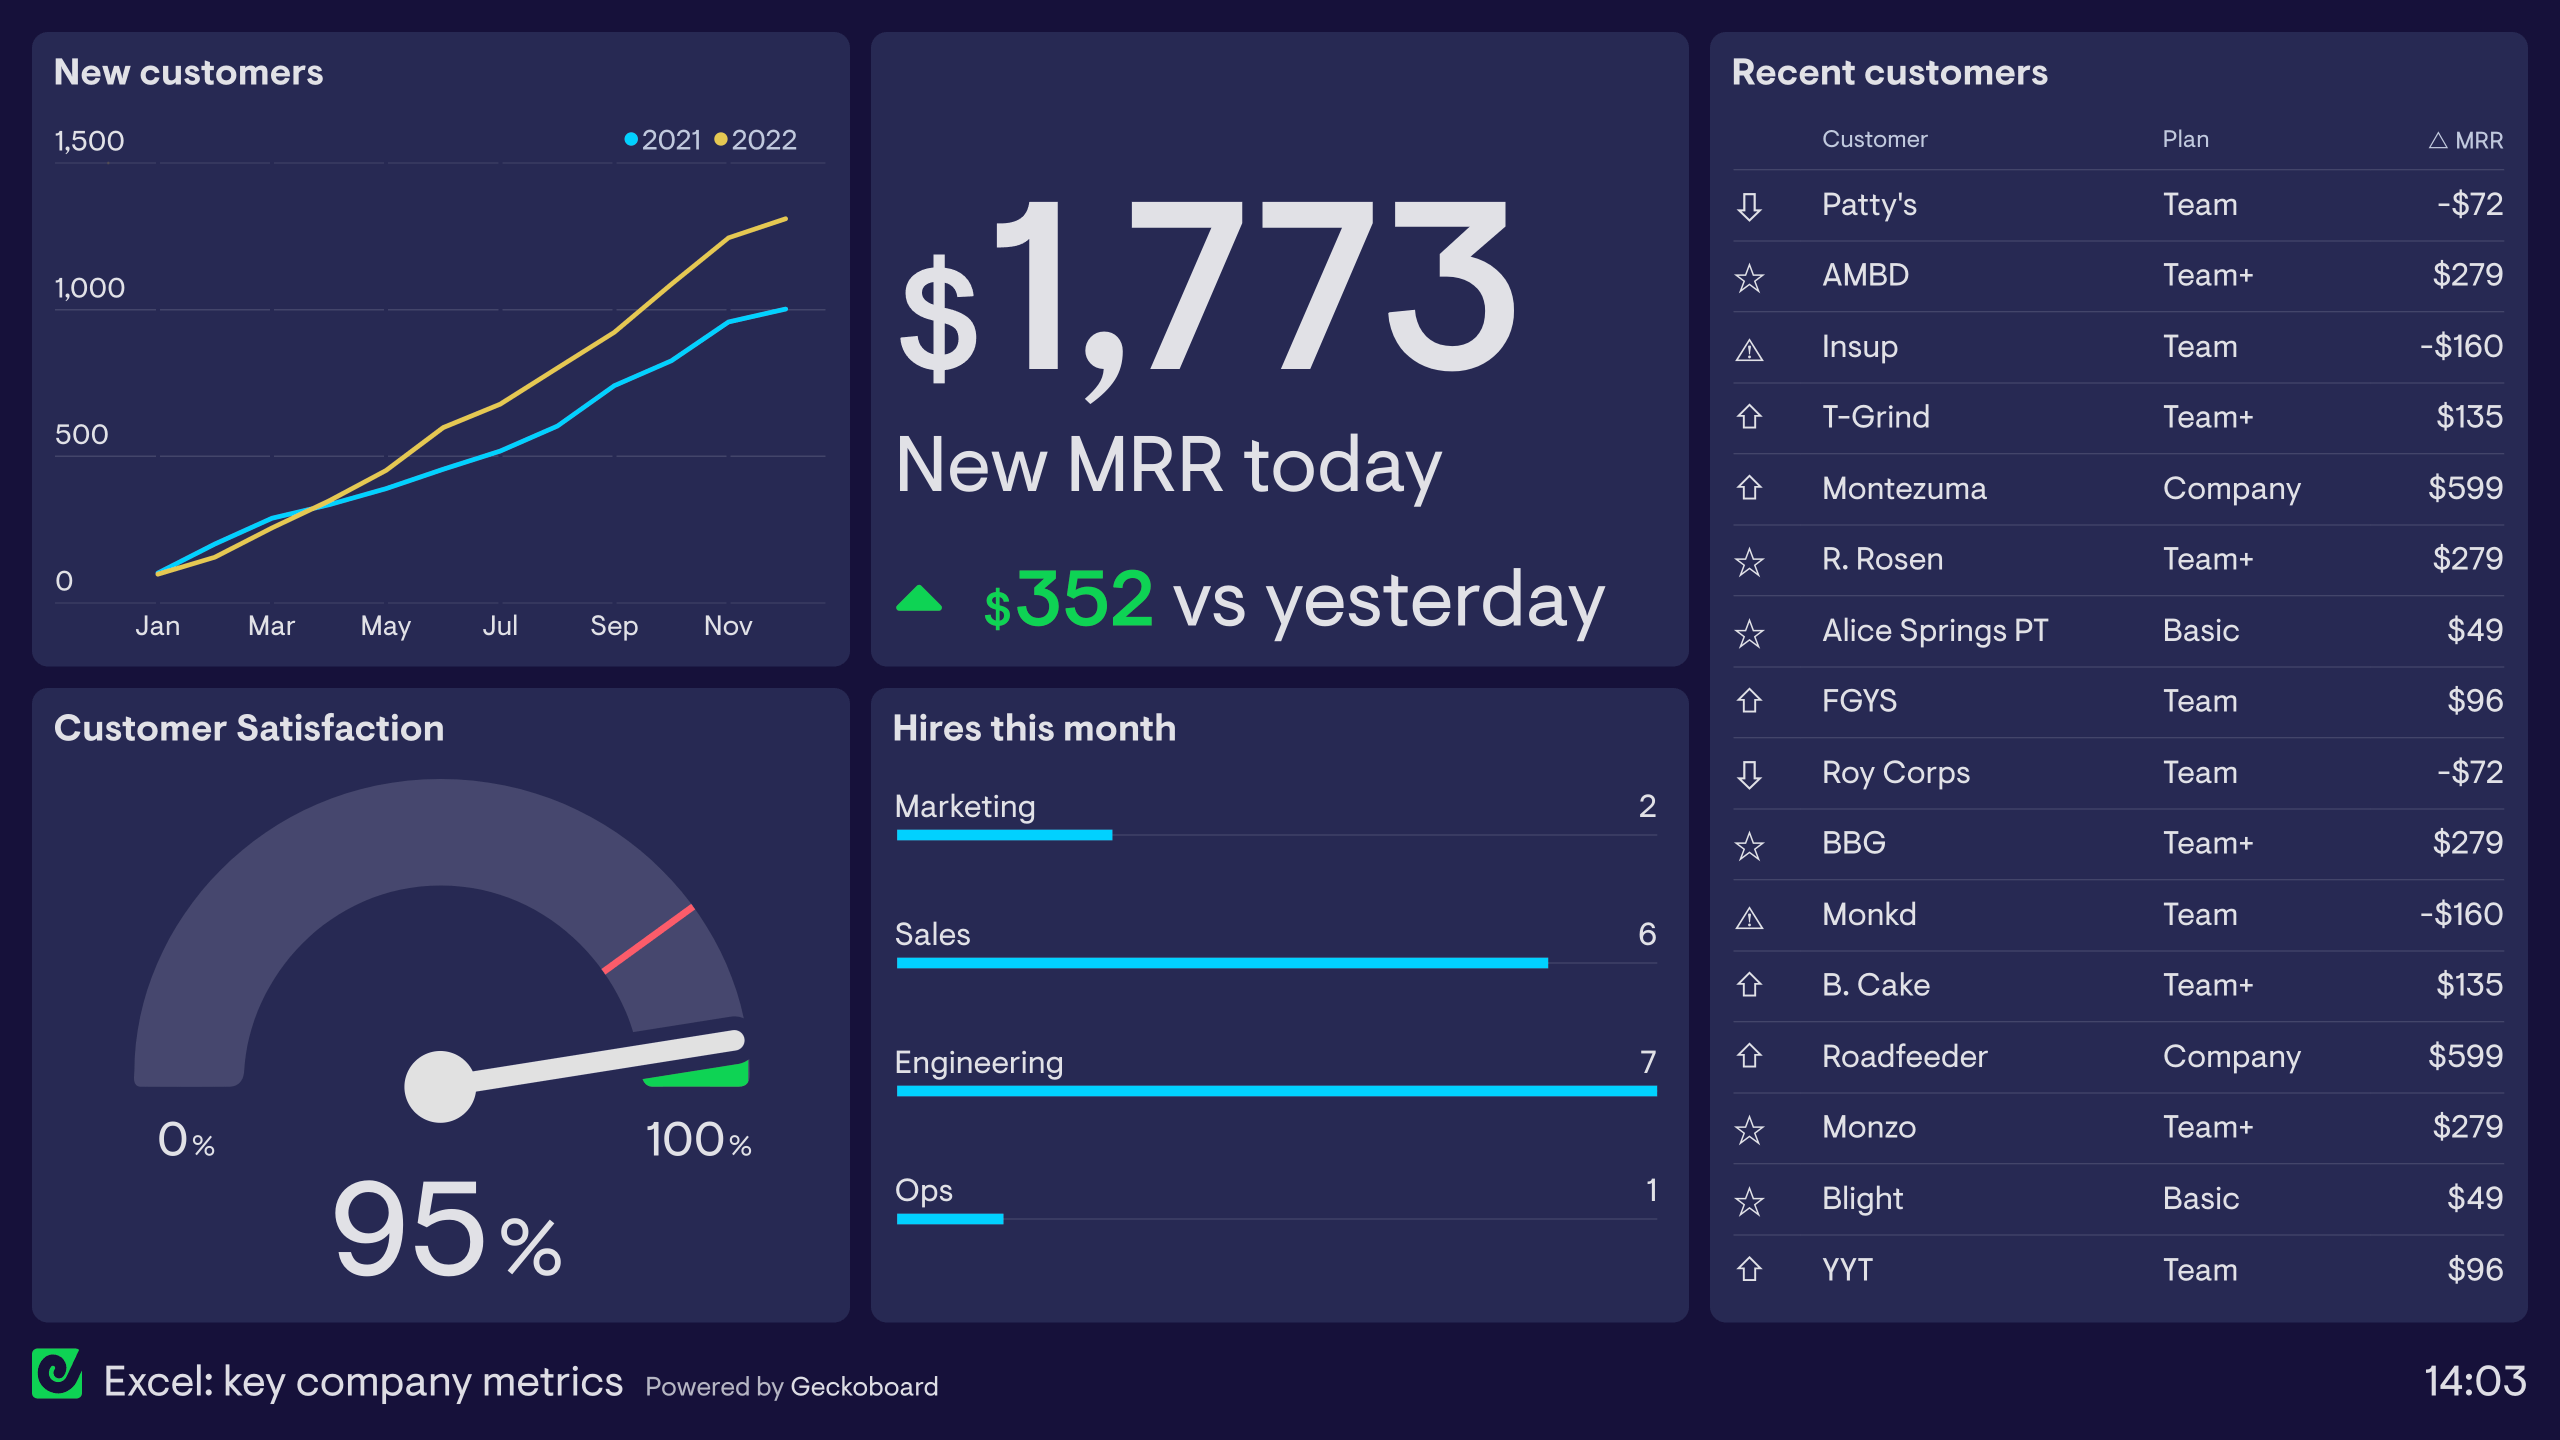 Excel dashboard snapshot highlighting key performance indicators such as a rising trend line graph for monthly recurring revenue (MRR), a gauge chart for customer satisfaction, and a bar graph for hires this month across different departments.